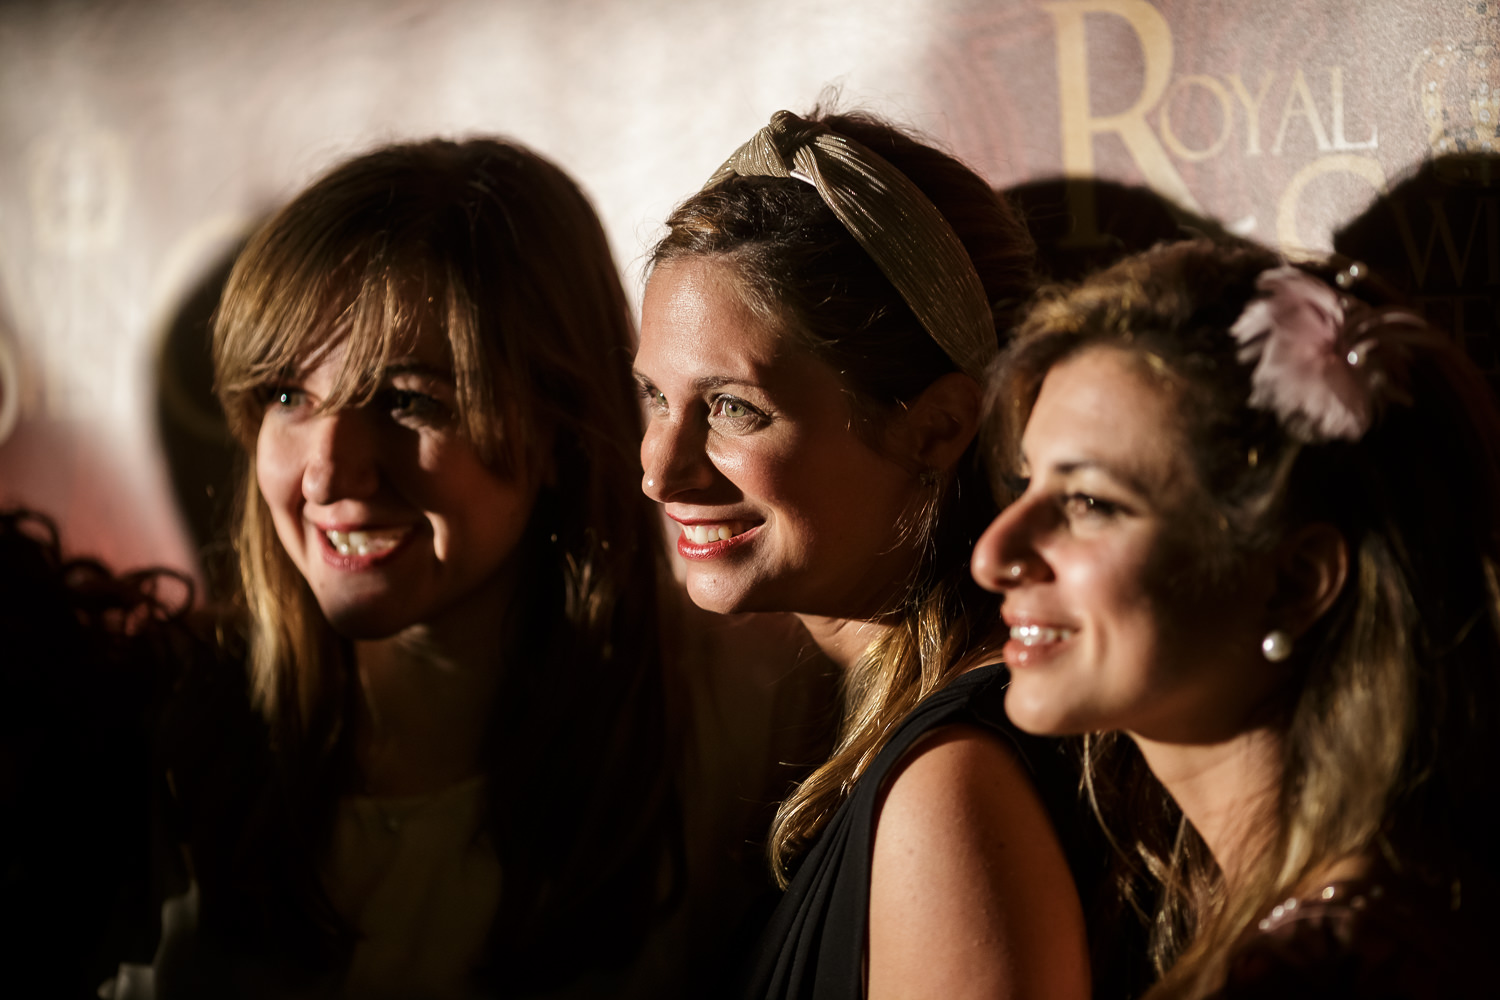  The Royal Swing Fest 2019: http://www.royalswingfest.com. Photo: www.fb.me/photosForDancersOnly - http://www.ebobrie.com/royal-swing-fest-2019 